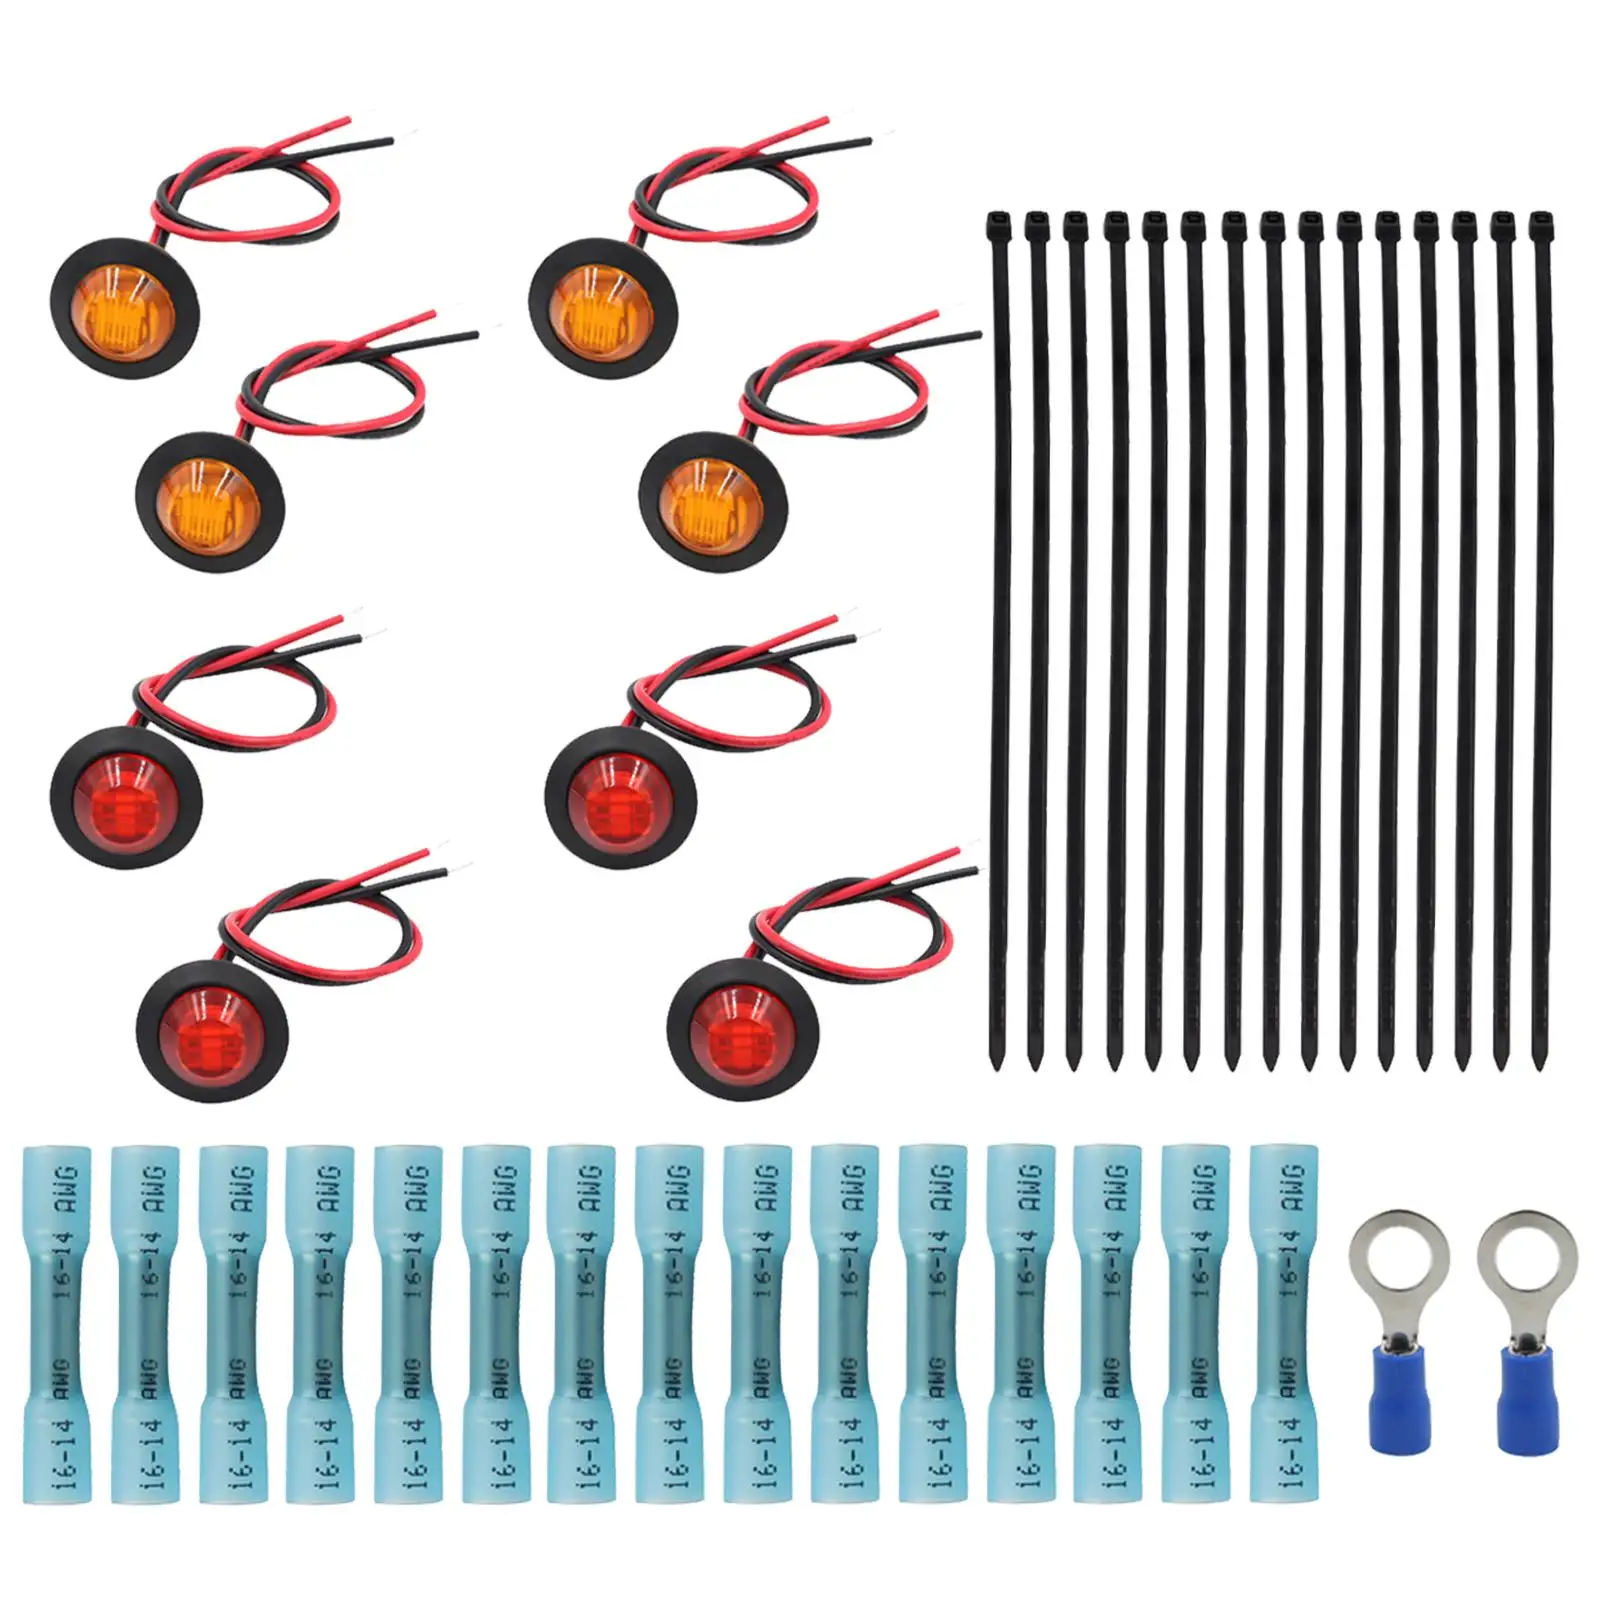 Turn signal Harness Harness LED Light Kit for ATV Spare Parts Replaces